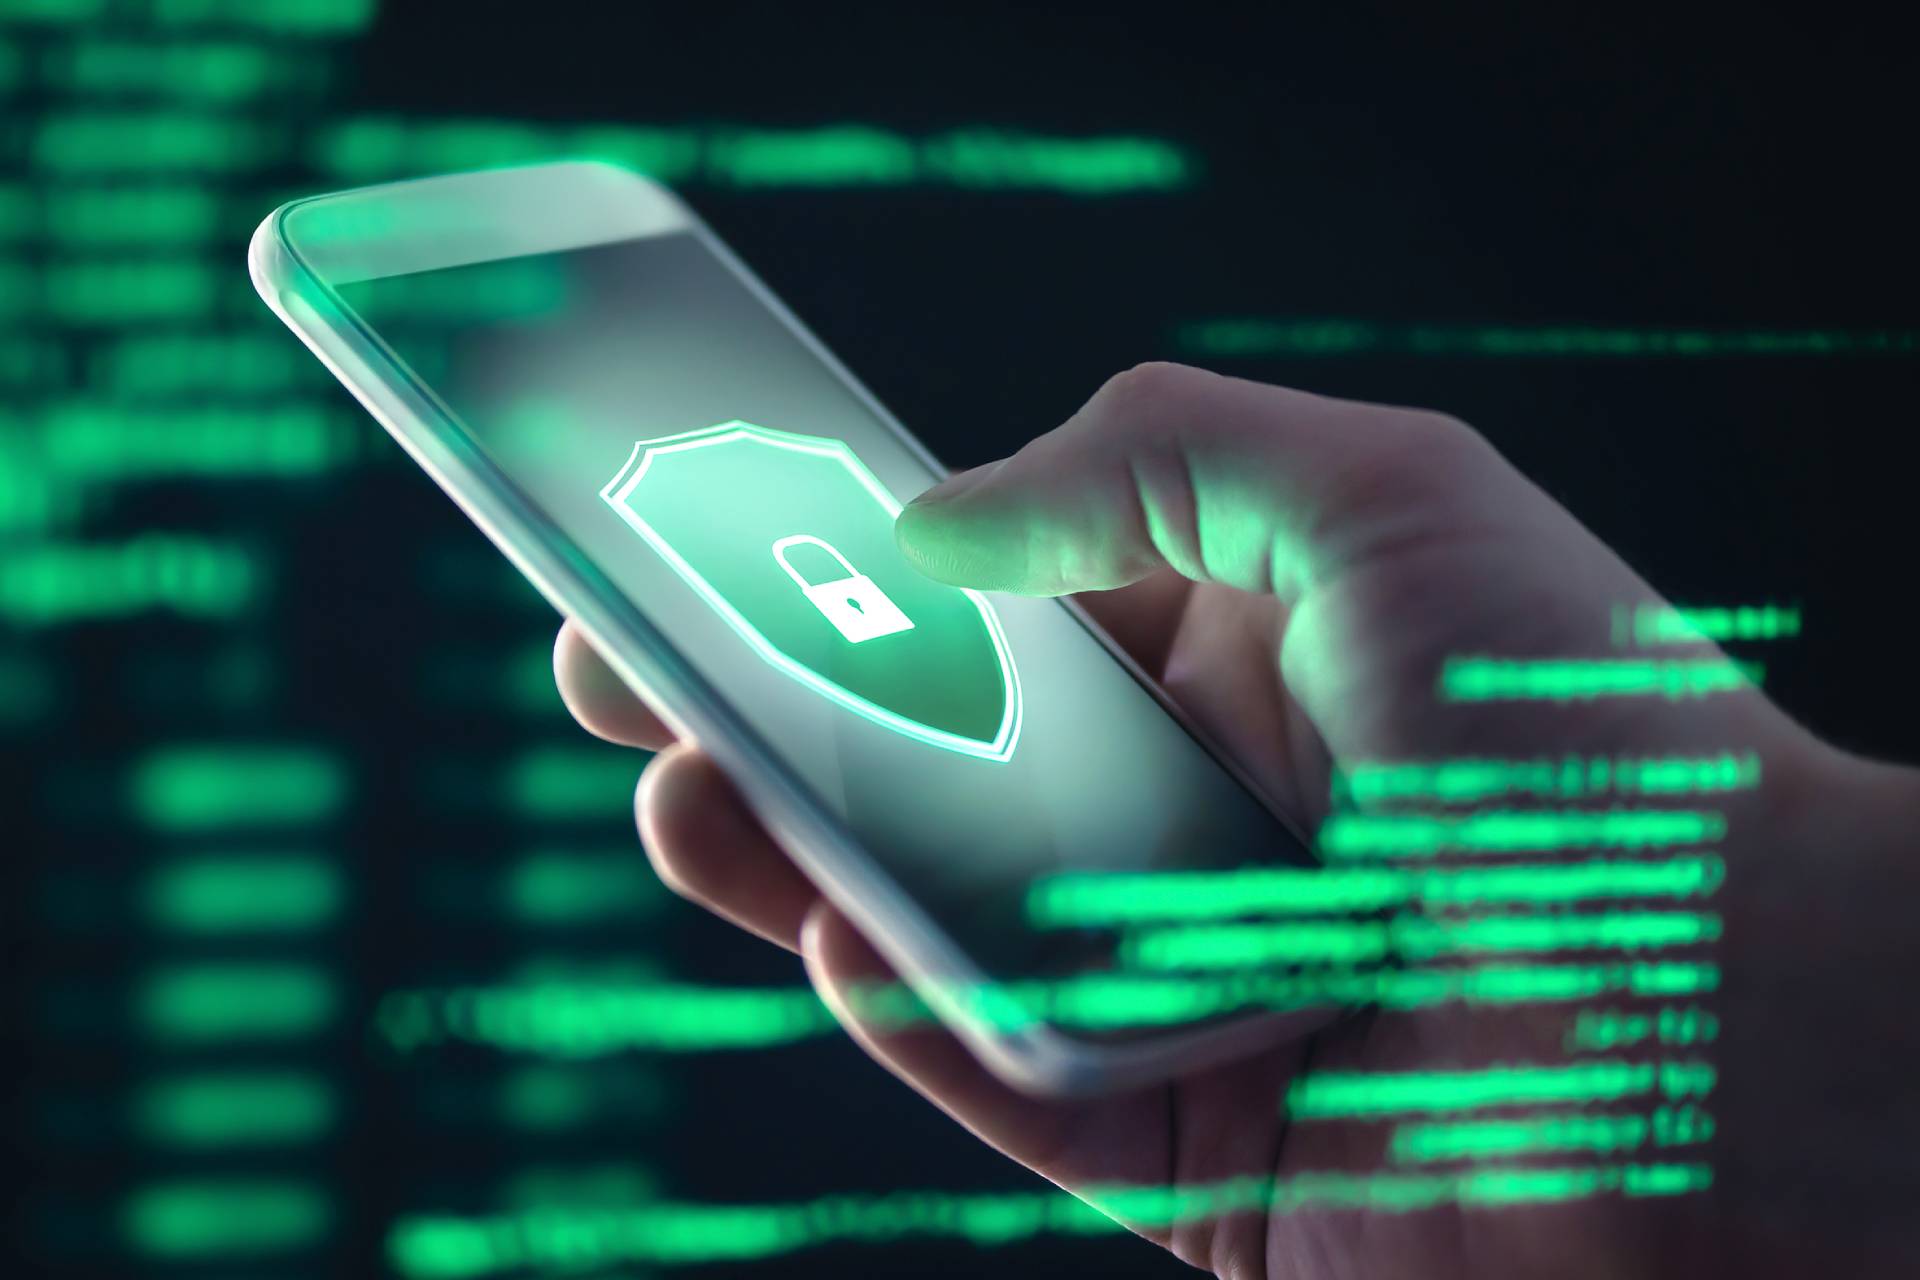 UAE mobile malware attacks saw steady decline as cybercriminals forego  low-hanging fruit - ITP.net